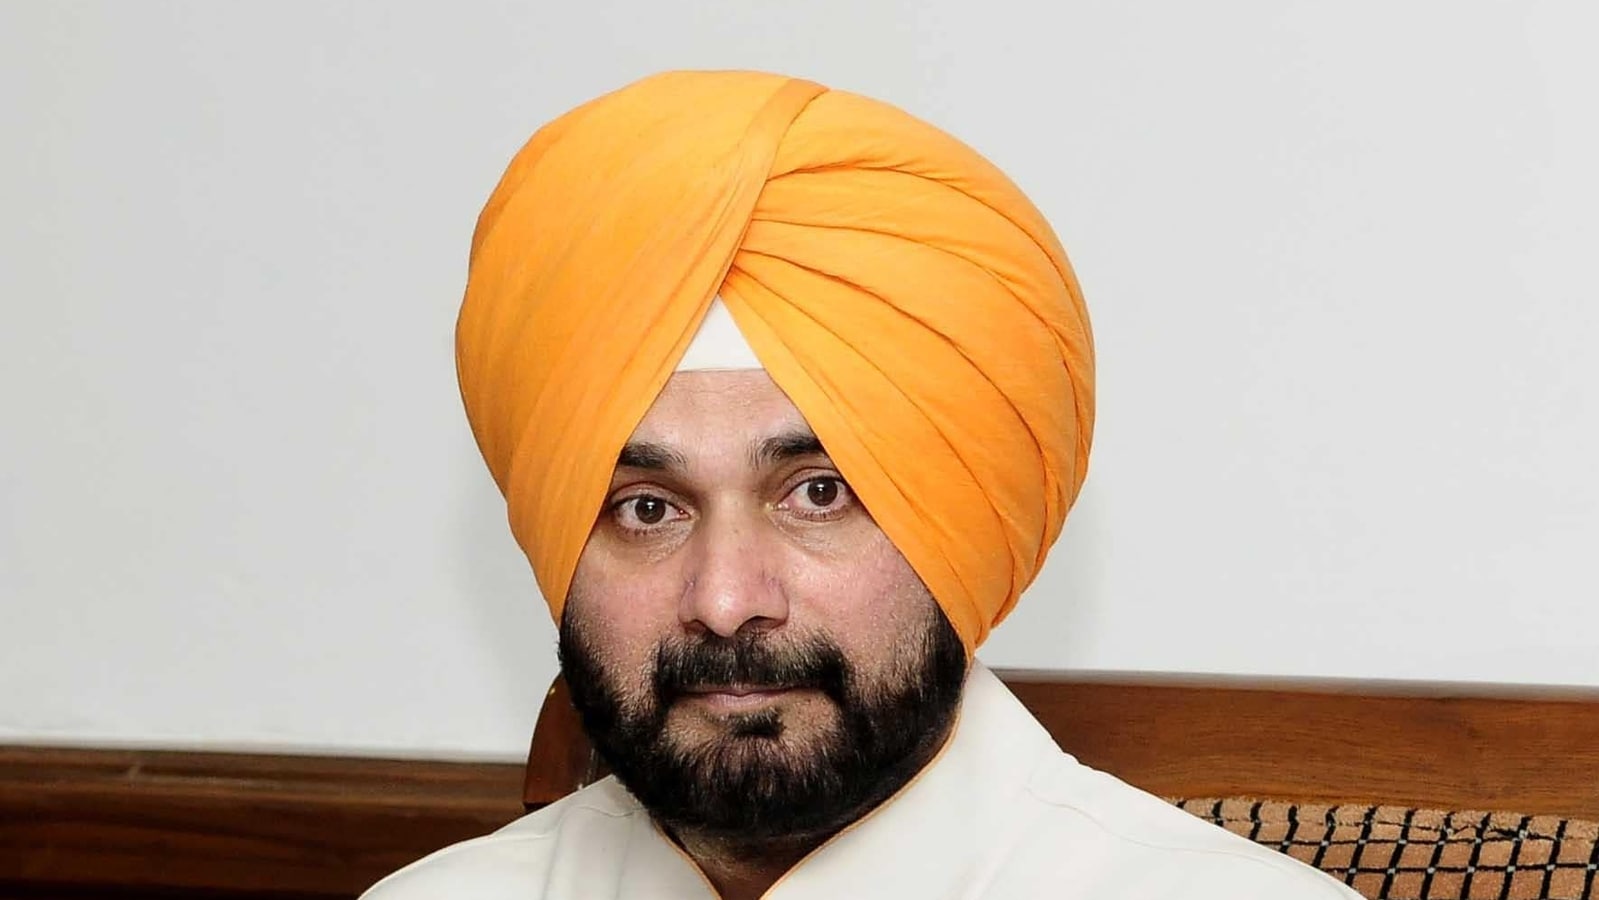 Navjot Singh Sidhu in hospital with liver issues, 'kept under observation' | Latest News India - Hindustan Times